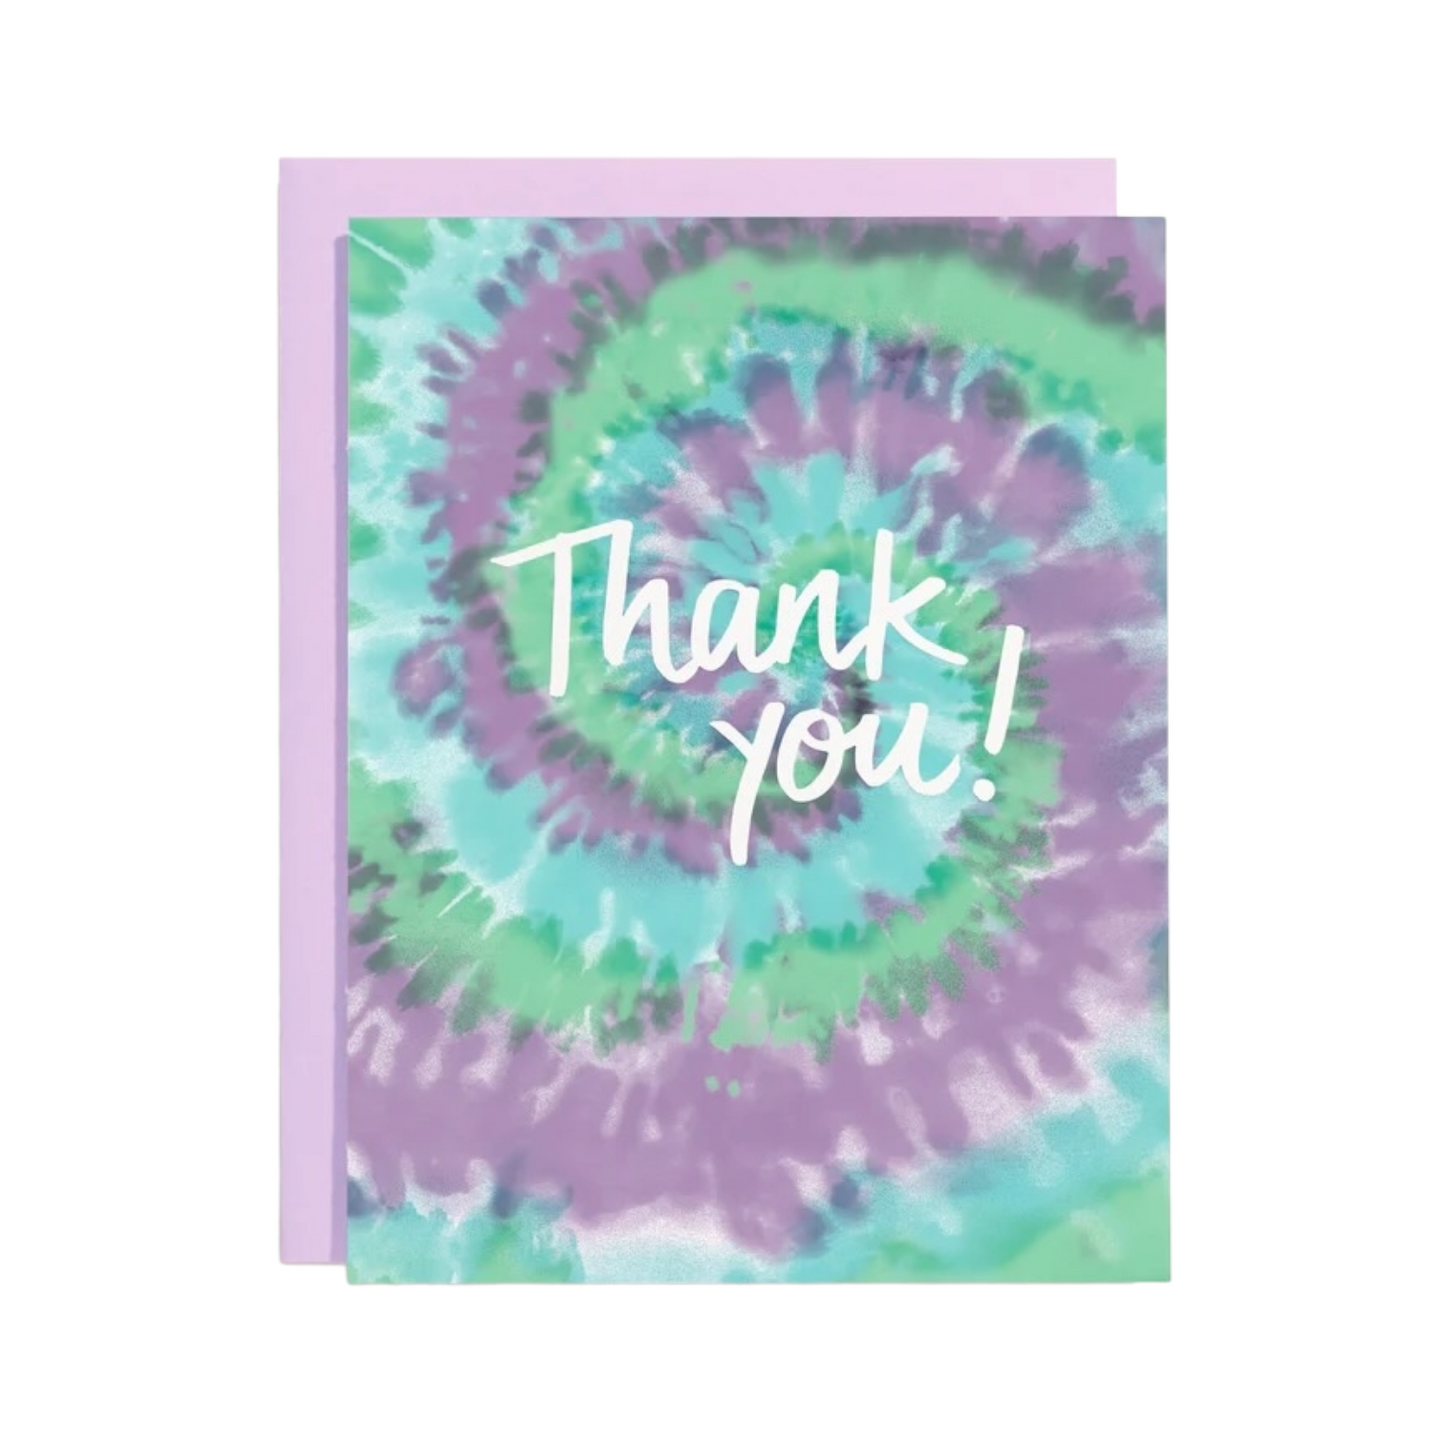 Tie Dye Thank You Boxed Set by Shorthand PressTie Dye Thank You Boxed Set by Shorthand PressTie Dye Thank You Boxed Set by Shorthand Press